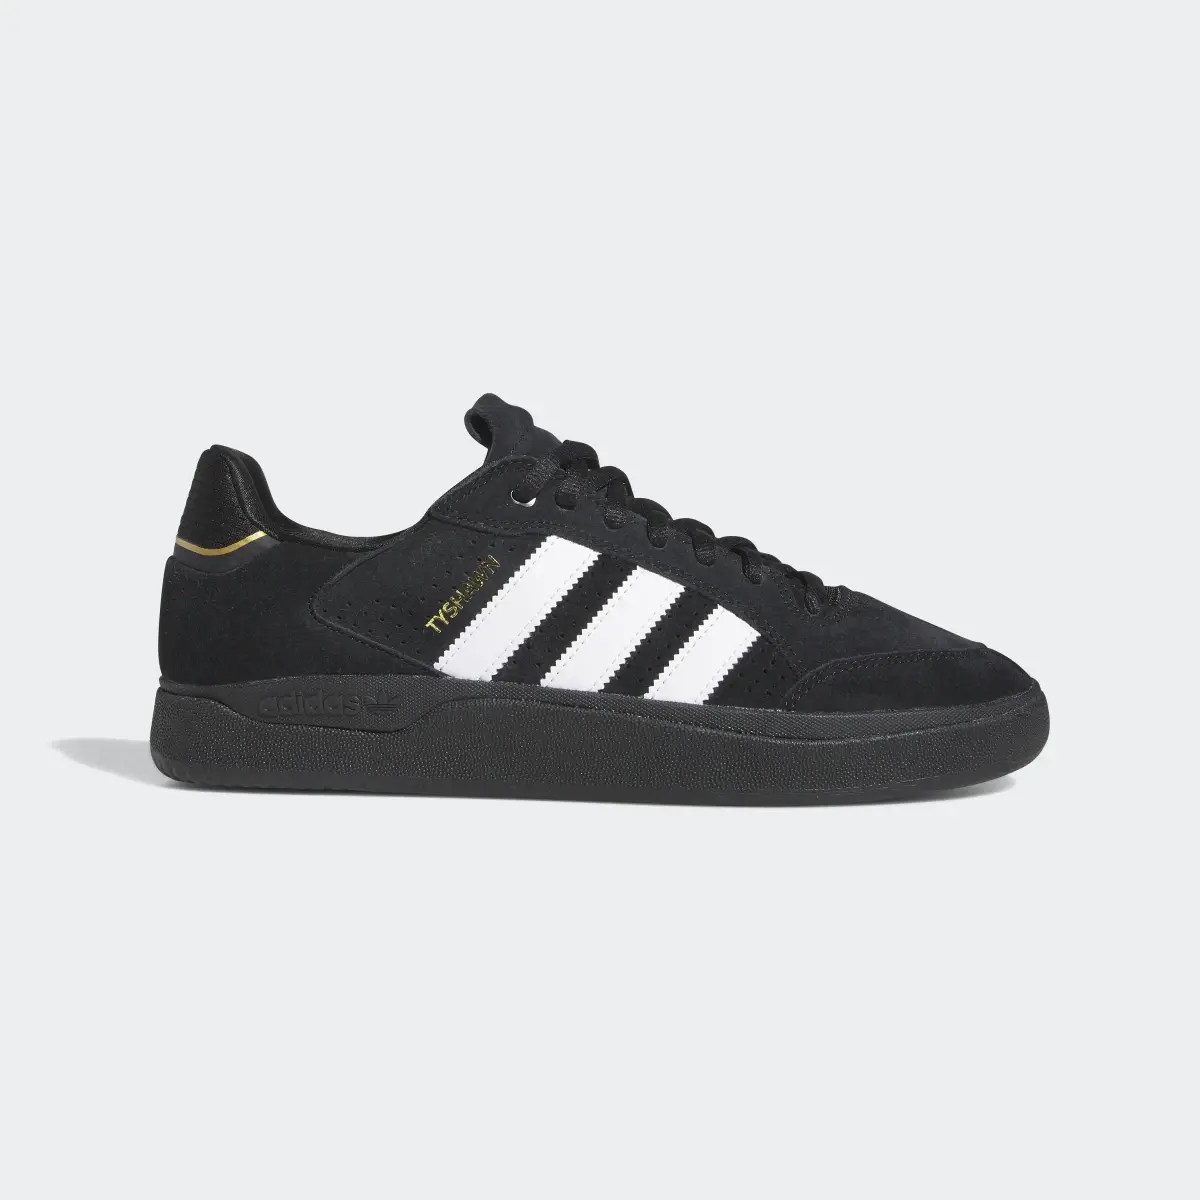 Adidas Tyshawn Low Shoes. 2